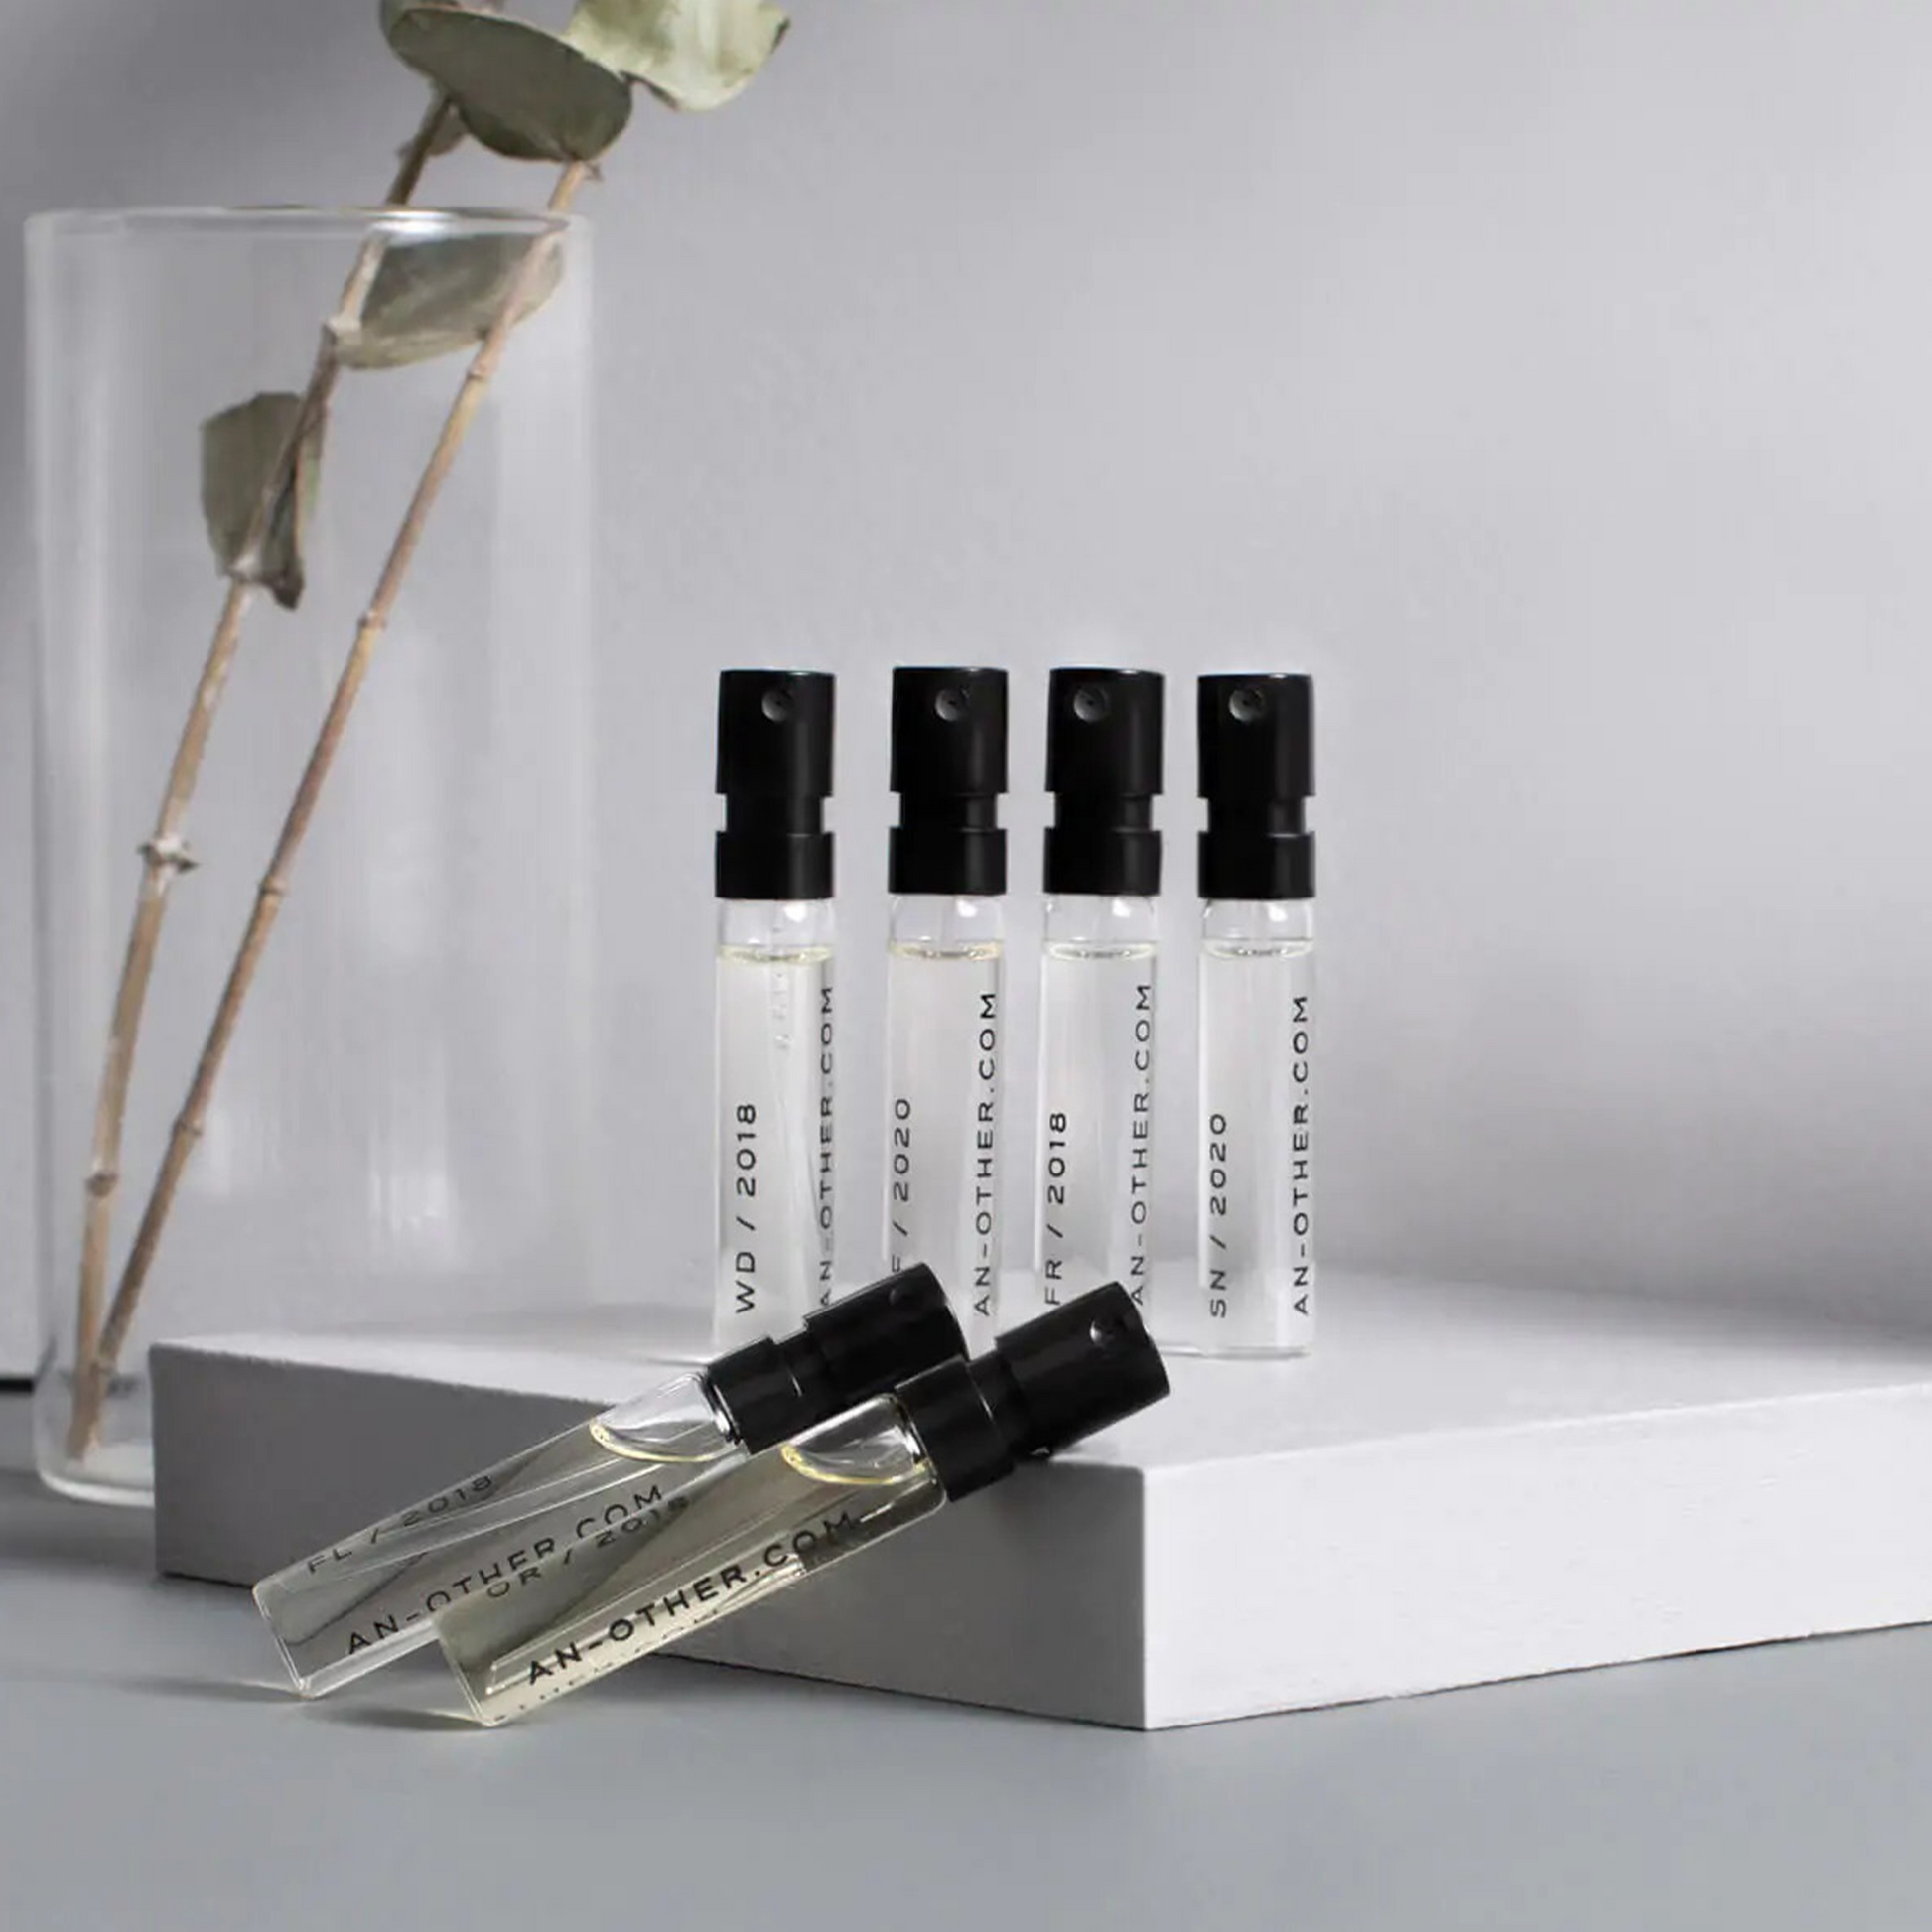 A.N Other Discover: Experience the full range of our gender-neutral modern fragrances.  This set includes: OR/2018, FL/2018, WF/2020, SN/2020, FR/2018, and WD/2018.